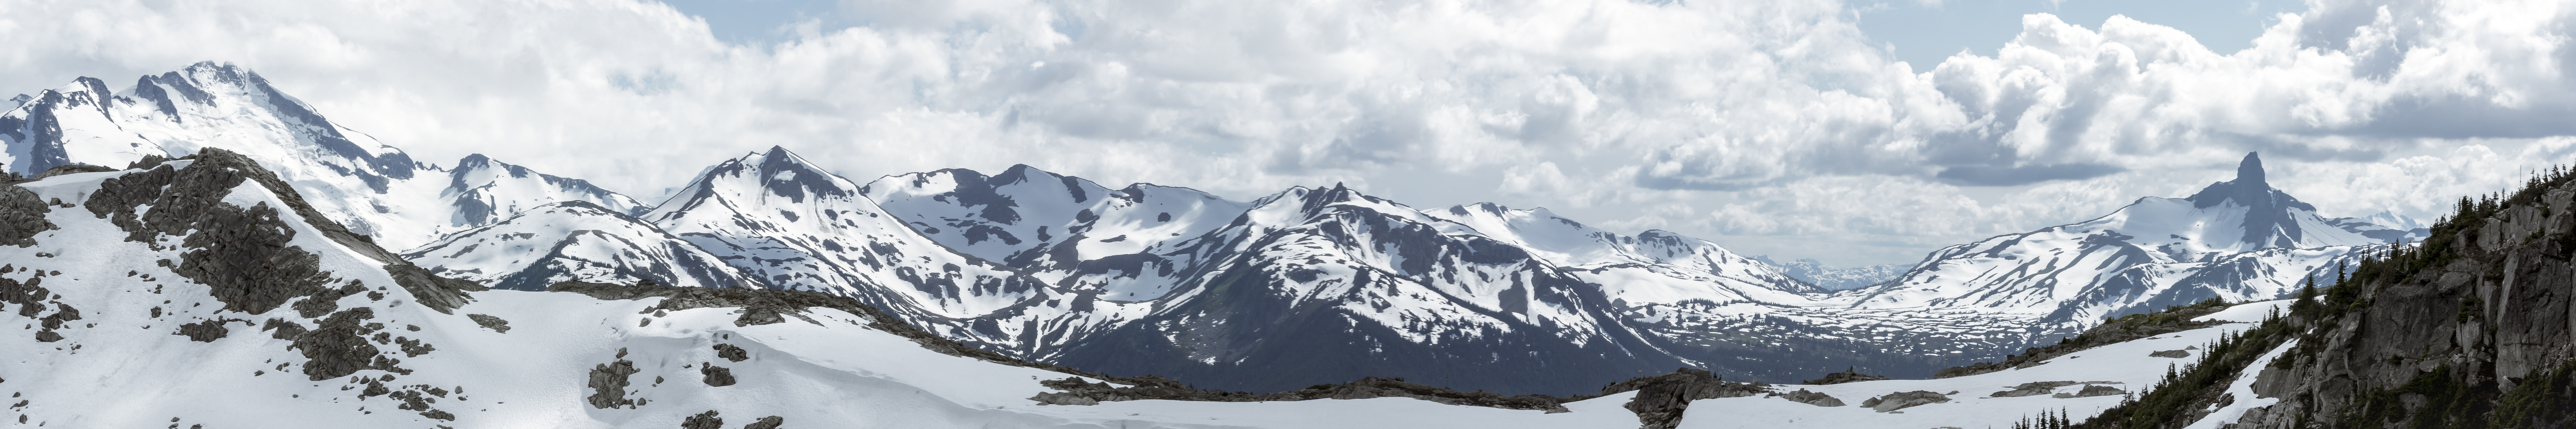 Wide Mountain Range Panorama with Black Tusk from Whistler Canada